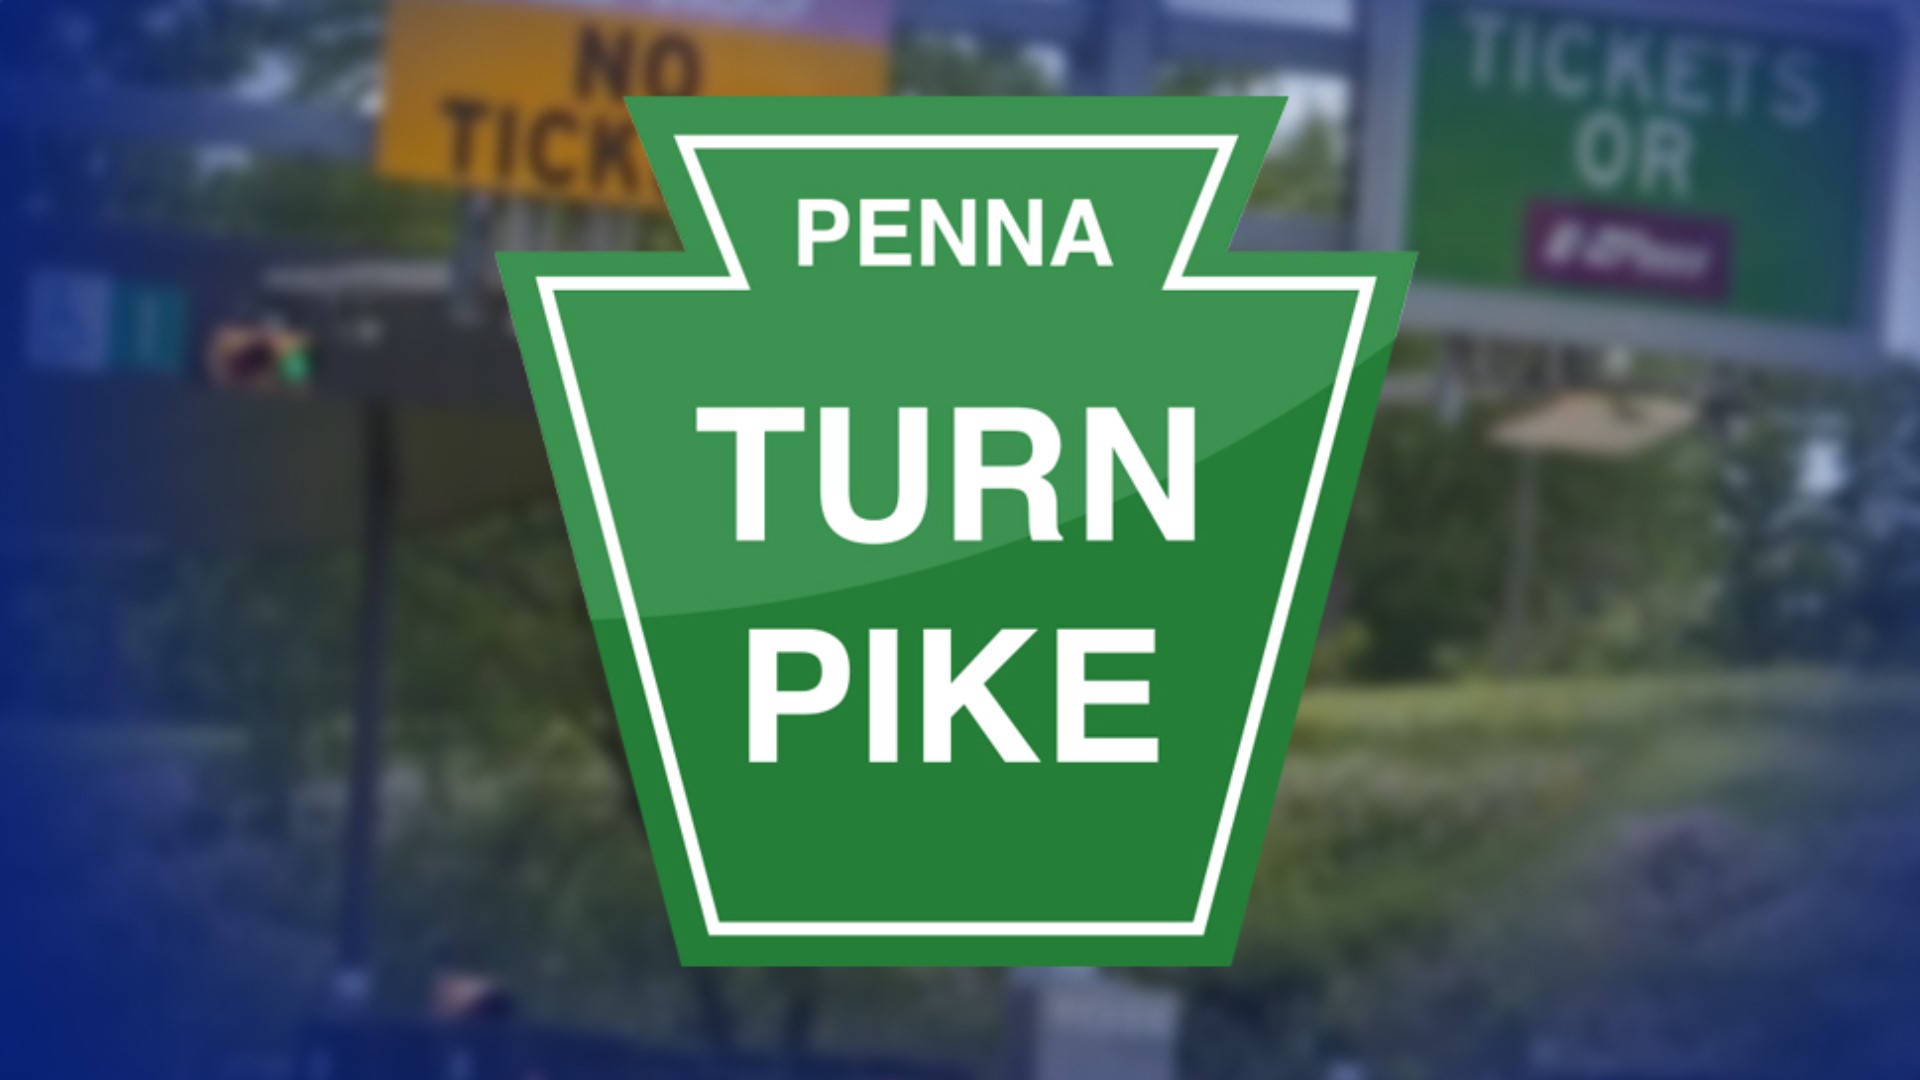 The Pennsylvania Turnpike is willing to crack down on drivers who don't pay their tolls but is defending its method for collecting those tolls.